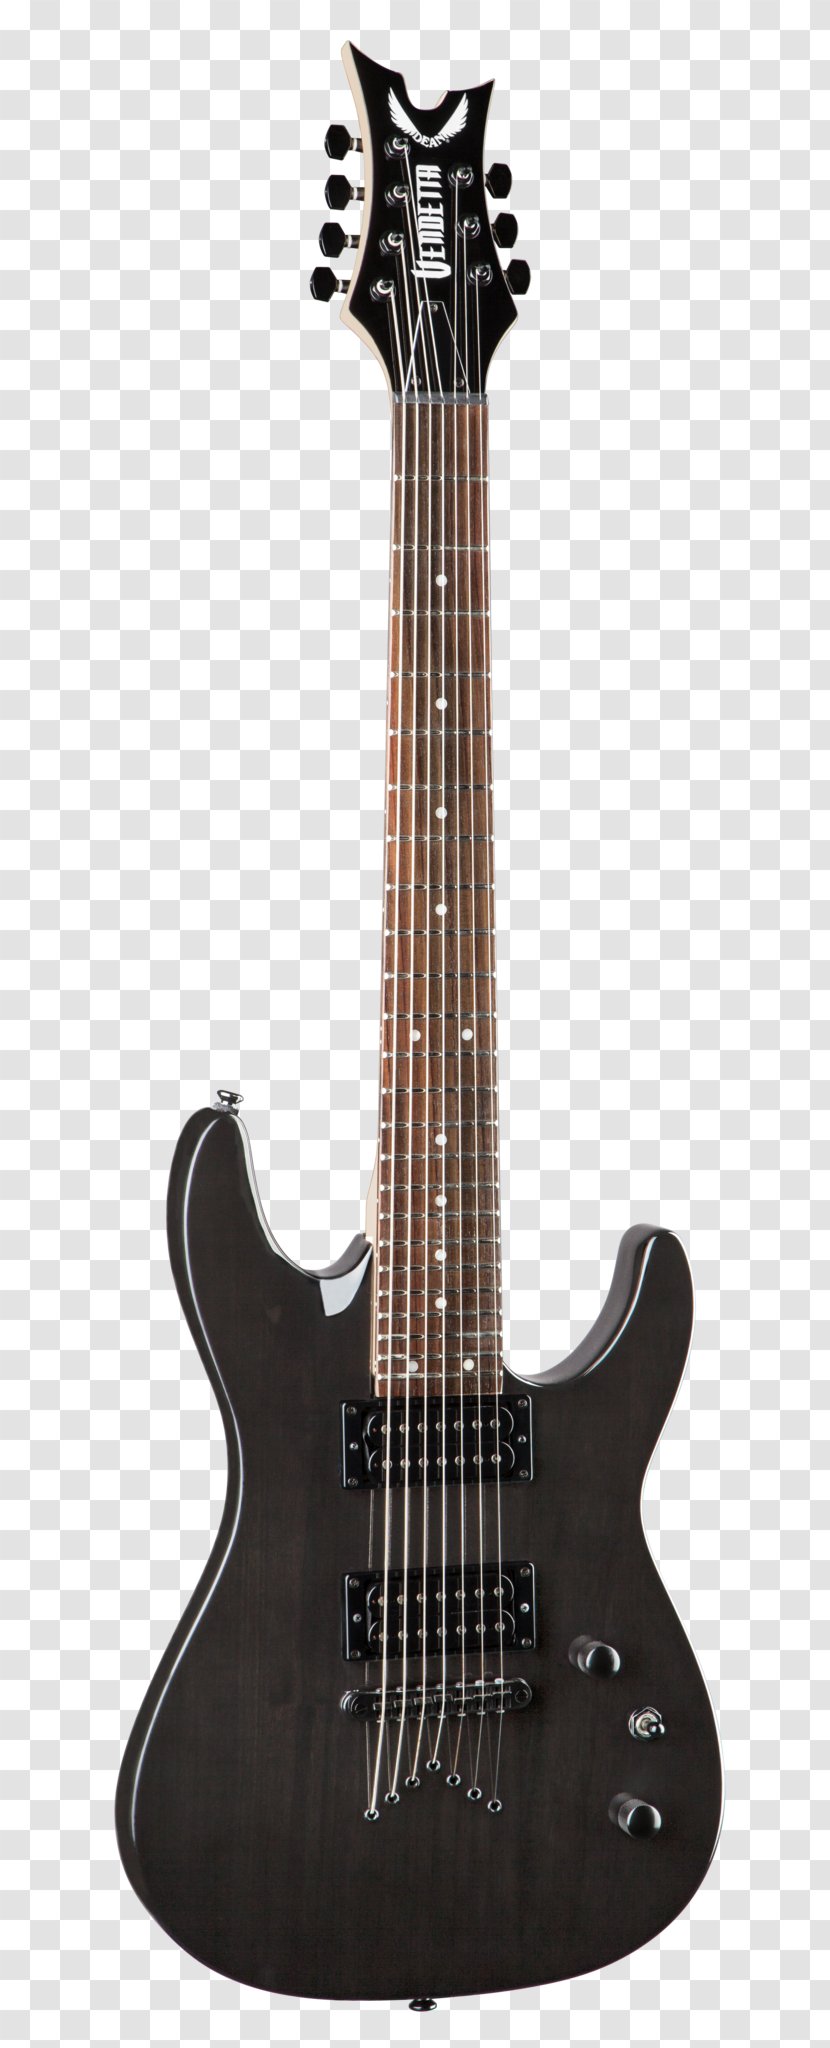 Fender Stratocaster Musical Instruments Corporation Electric Guitar Squier - Musician Transparent PNG